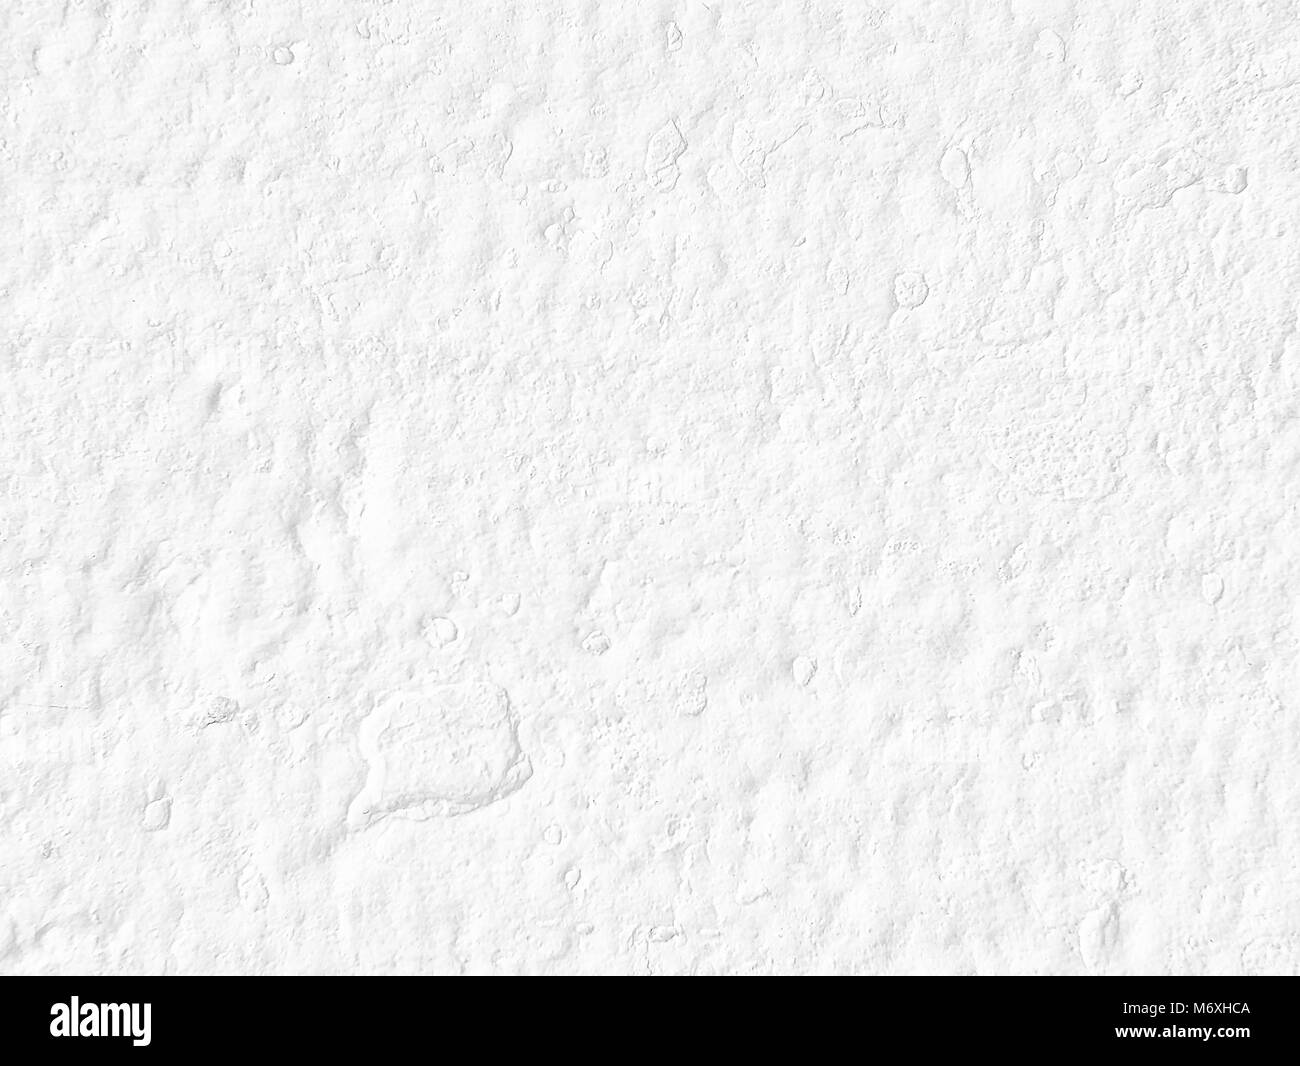 White Concrete Wall Texture Background,flooring for text, images, websites, websites or graphics for commercial campaigns. Stock Photo